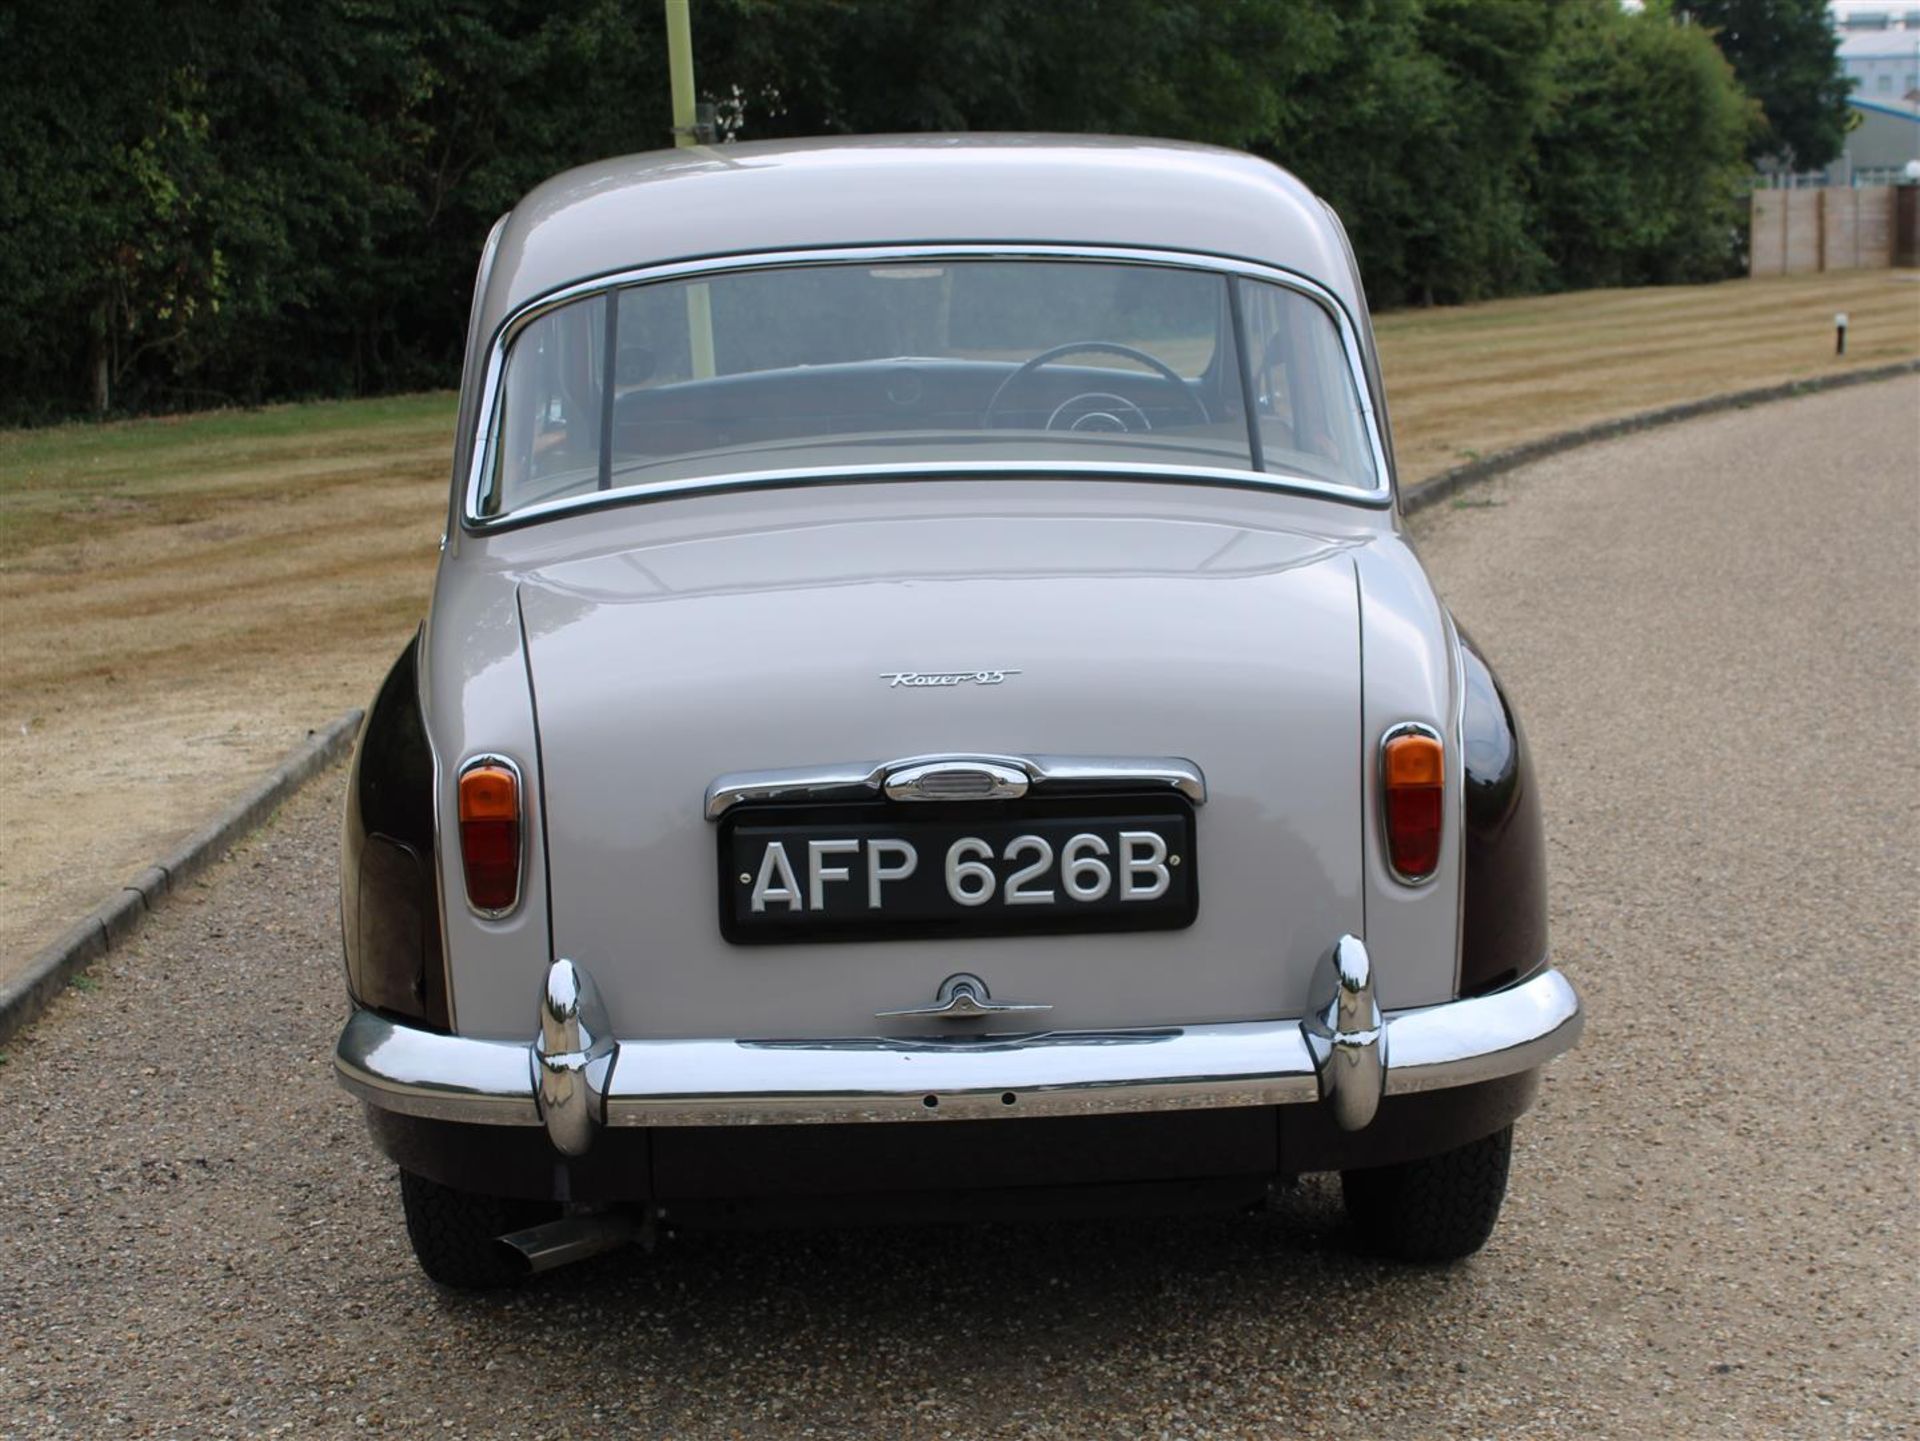 1964 Rover P4 95 Saloon - Image 5 of 23